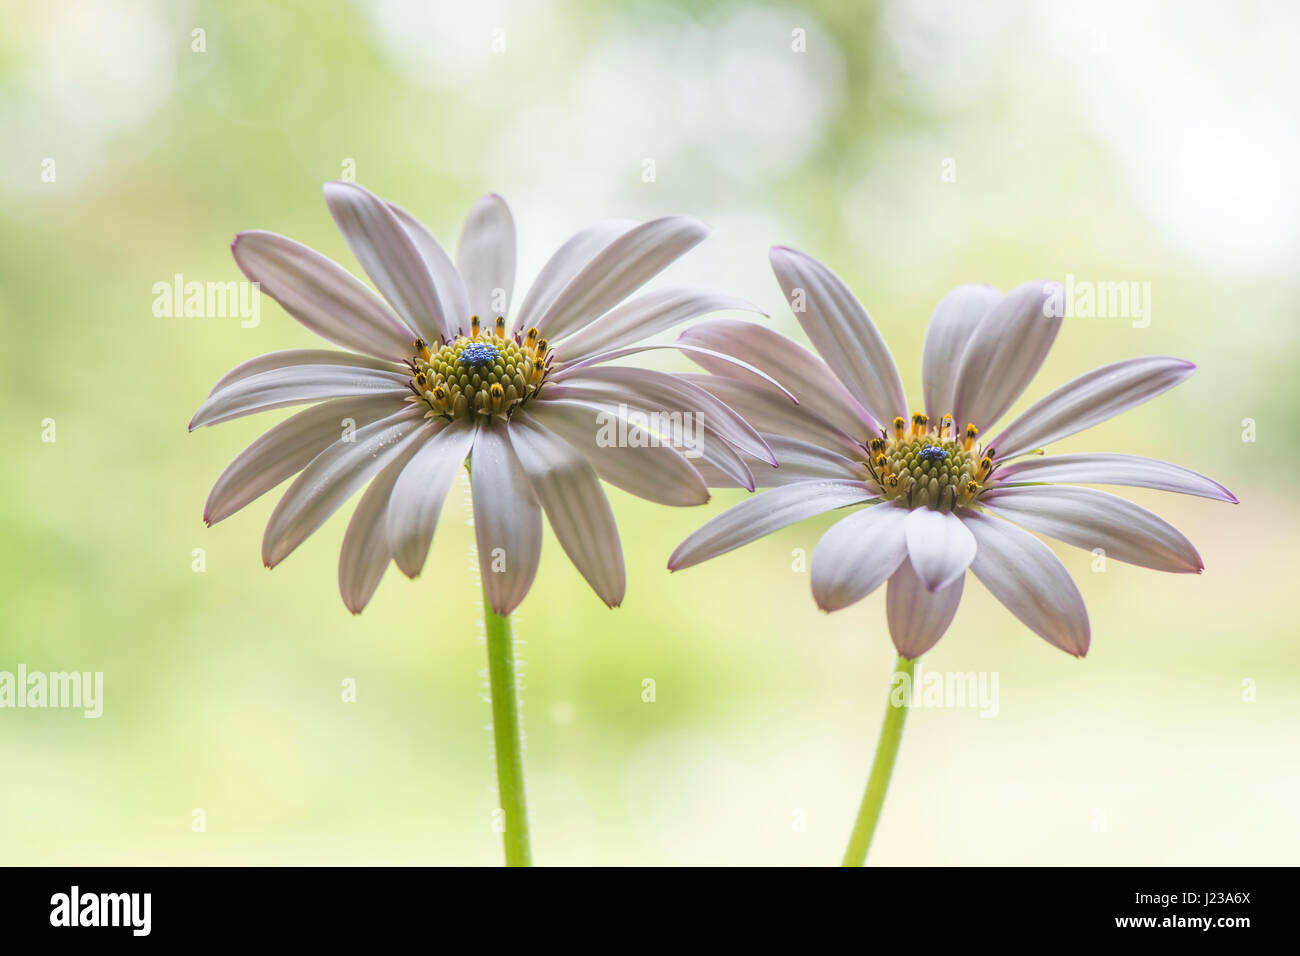 Close-up image of the beautiful white, summer flowering Osteospermum barberiae, also known as the Sun Daisy, Cape daisy and African Daisy. Stock Photo